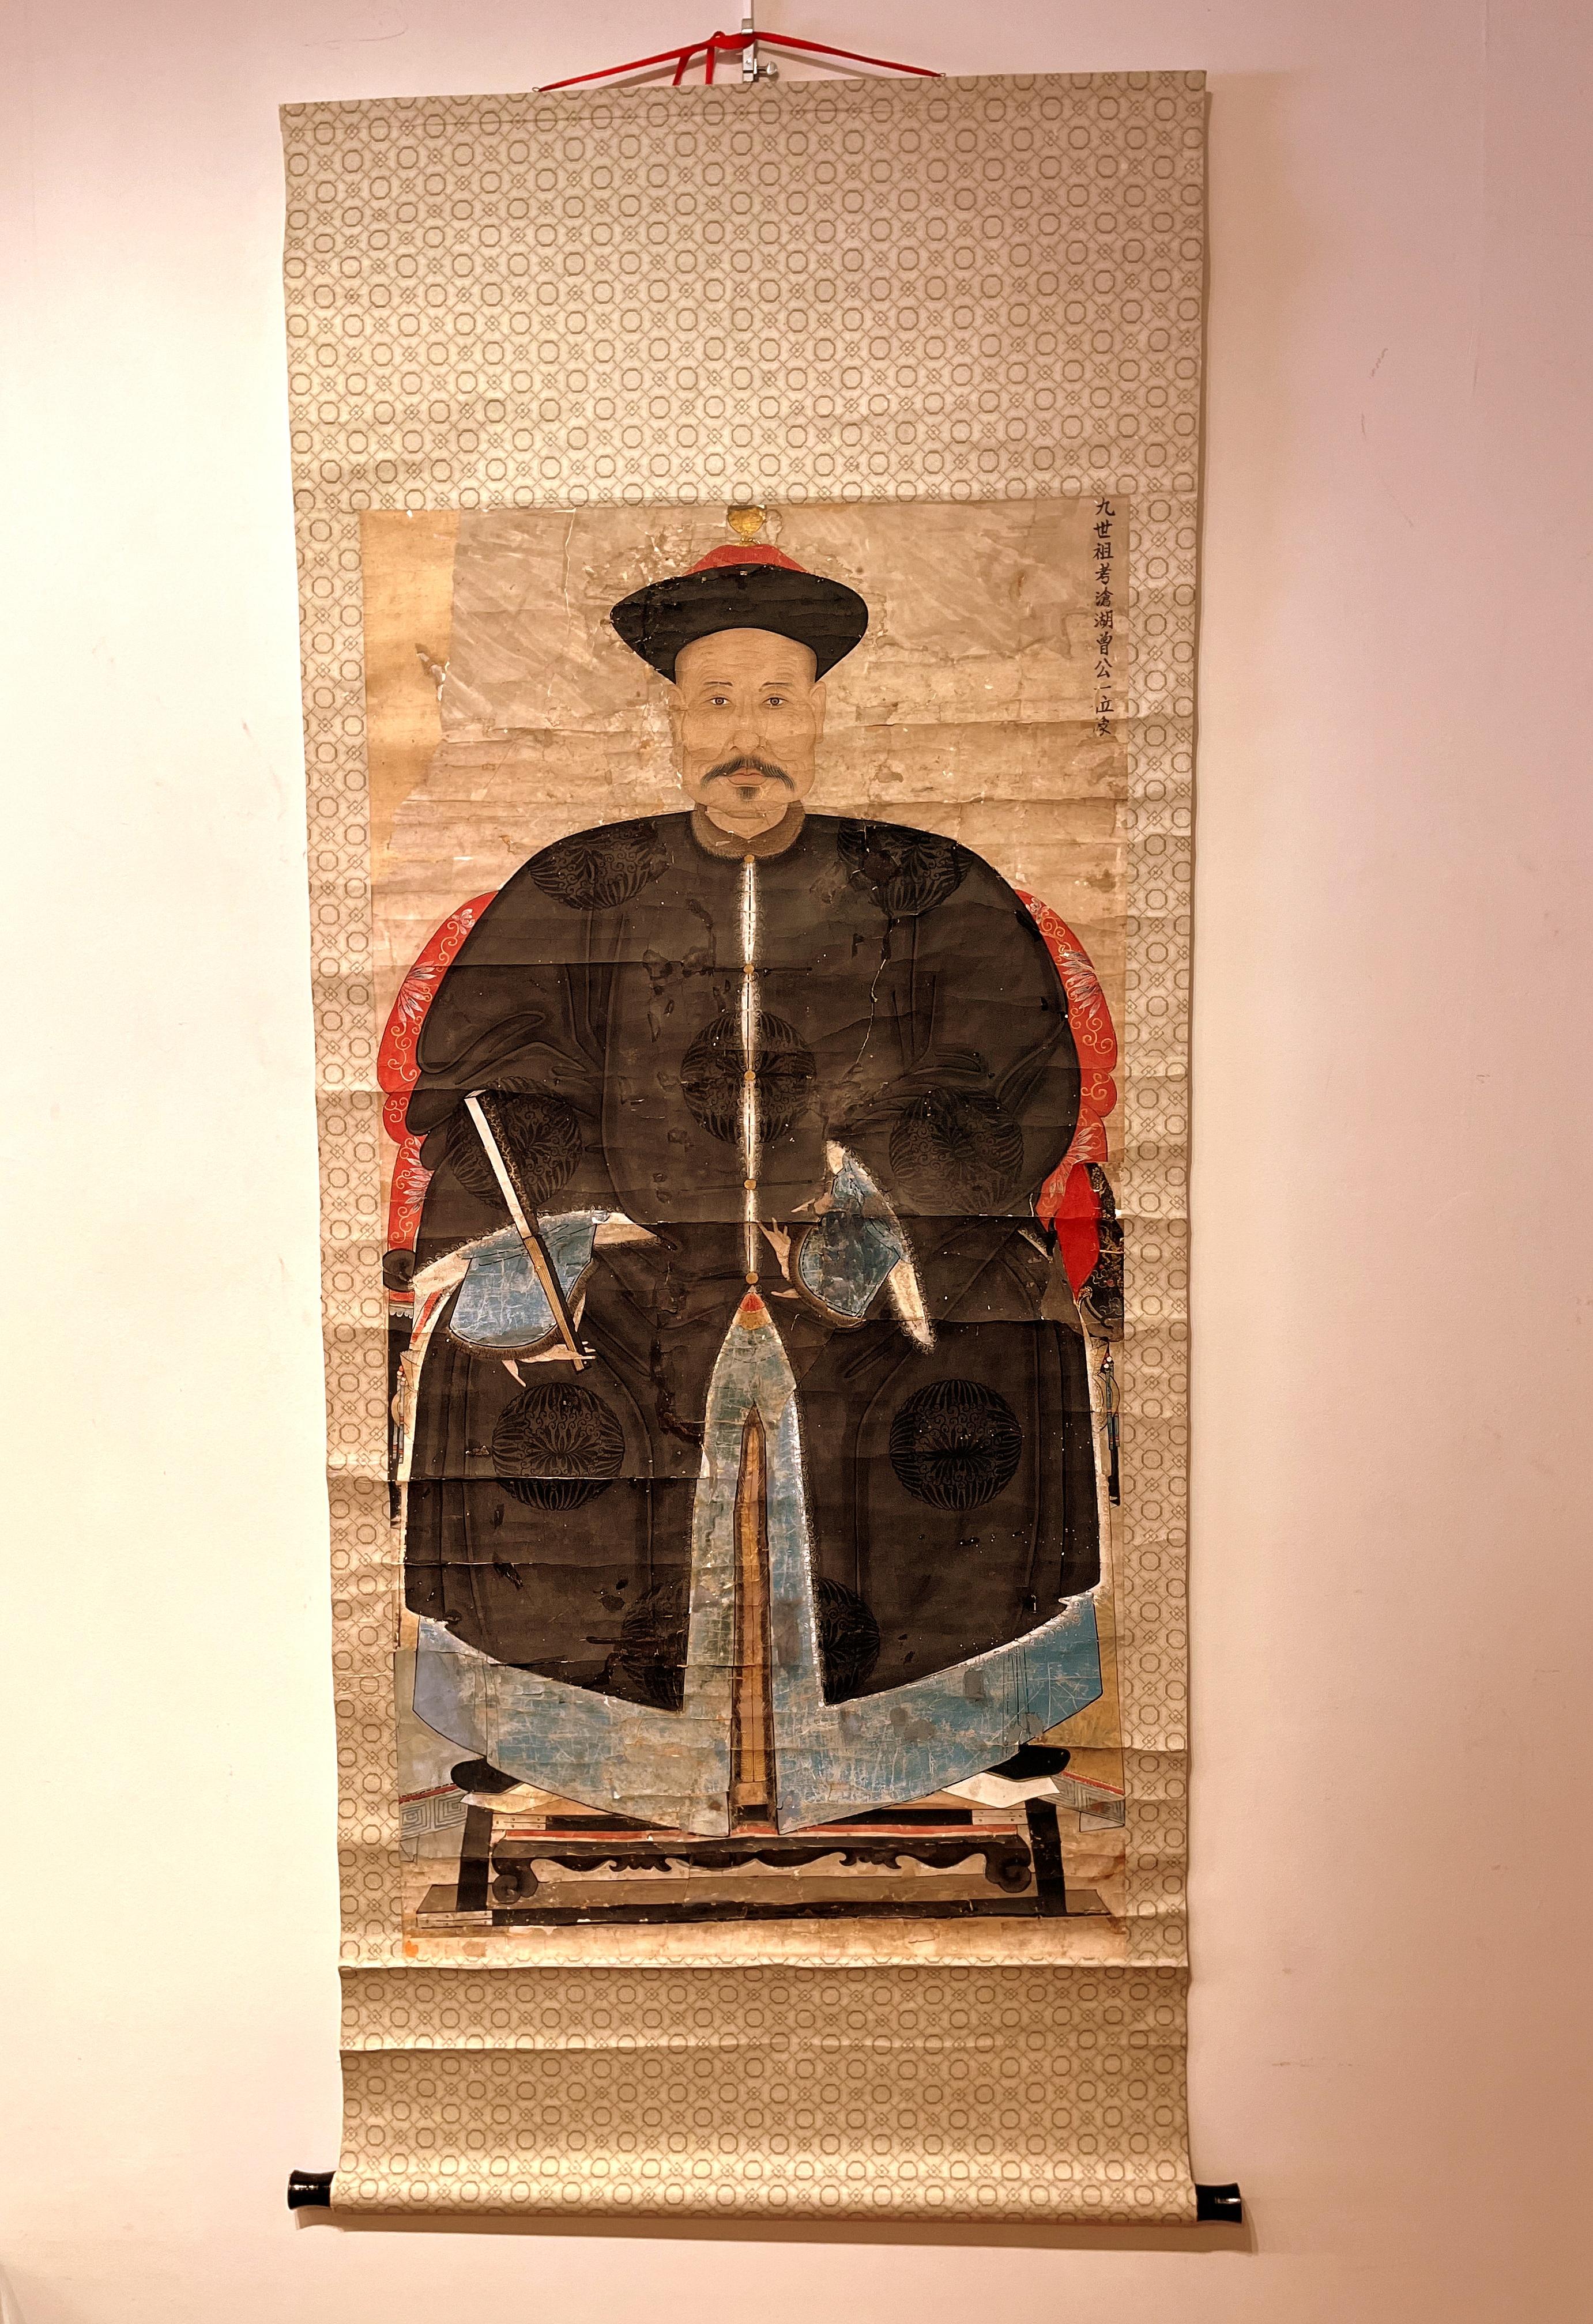 Qing Dynasty Chinese Ancestral Portrait, 19th Century,
Ancestor officer commemorate portrait and descriptions of characters signed on top right corners, ink and color on paper
Overall size:  72